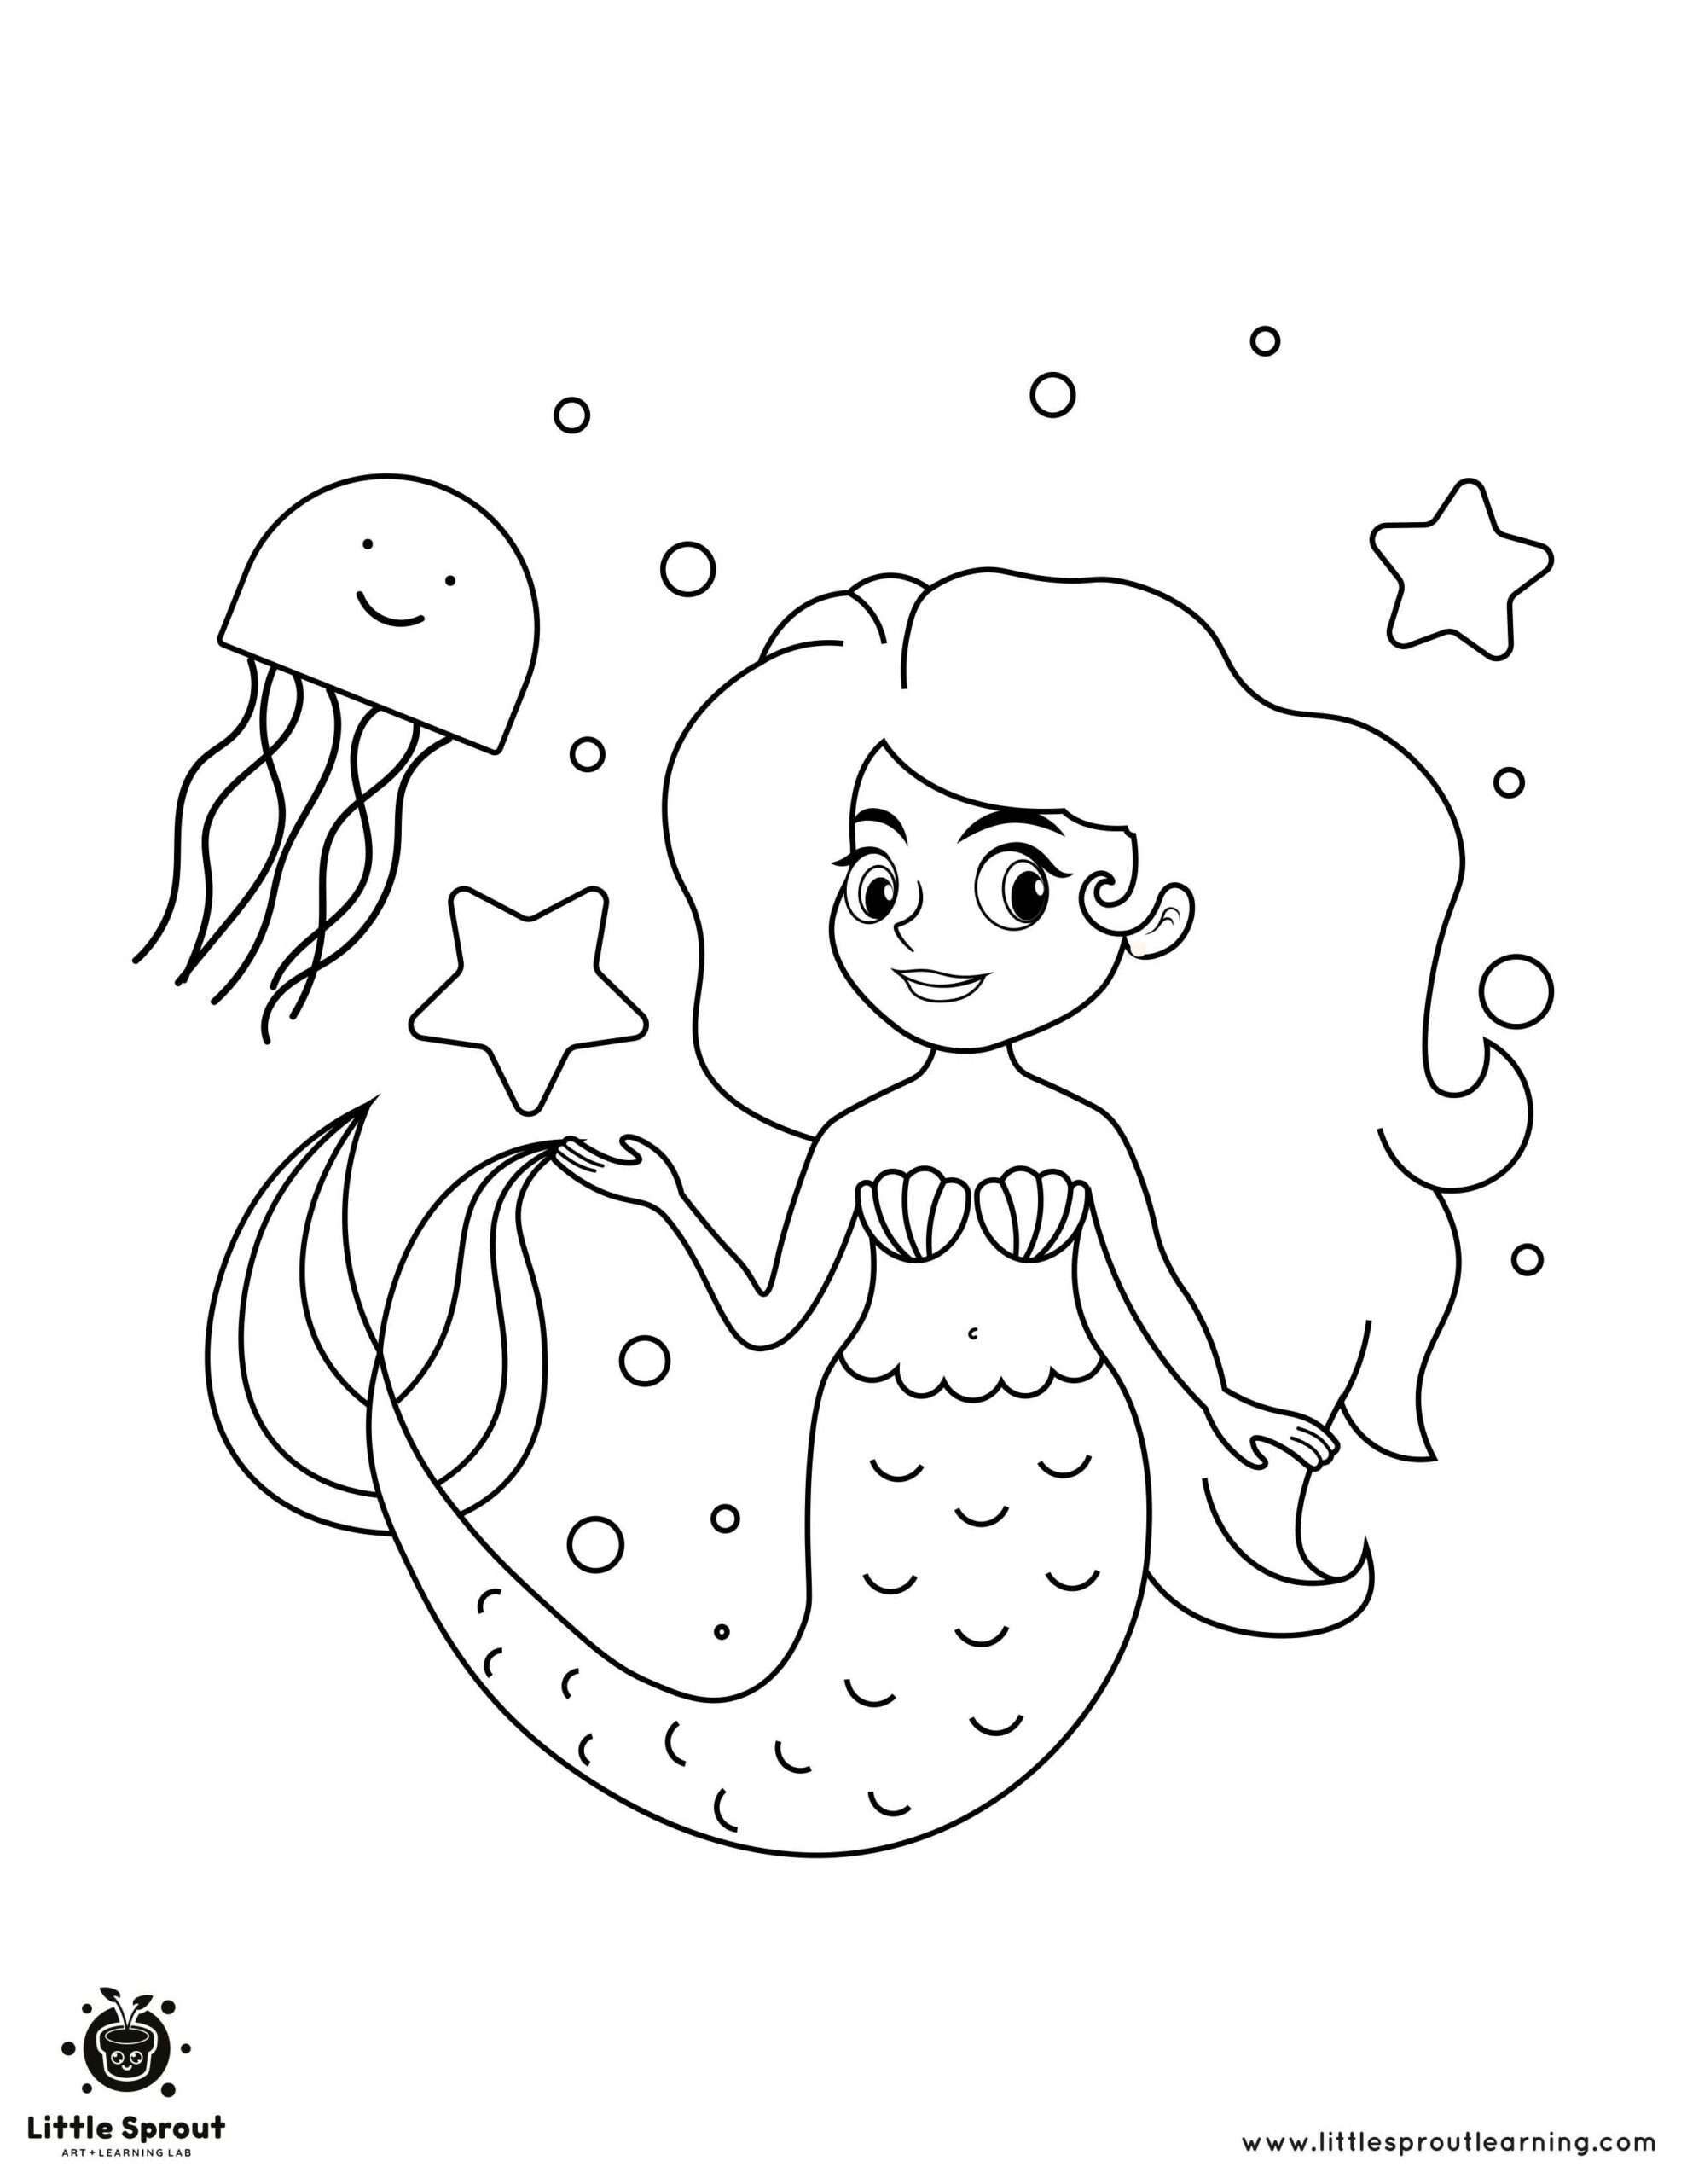 195 Jellyfish Coloring Page Designs: Underwater Beauty in Color 187